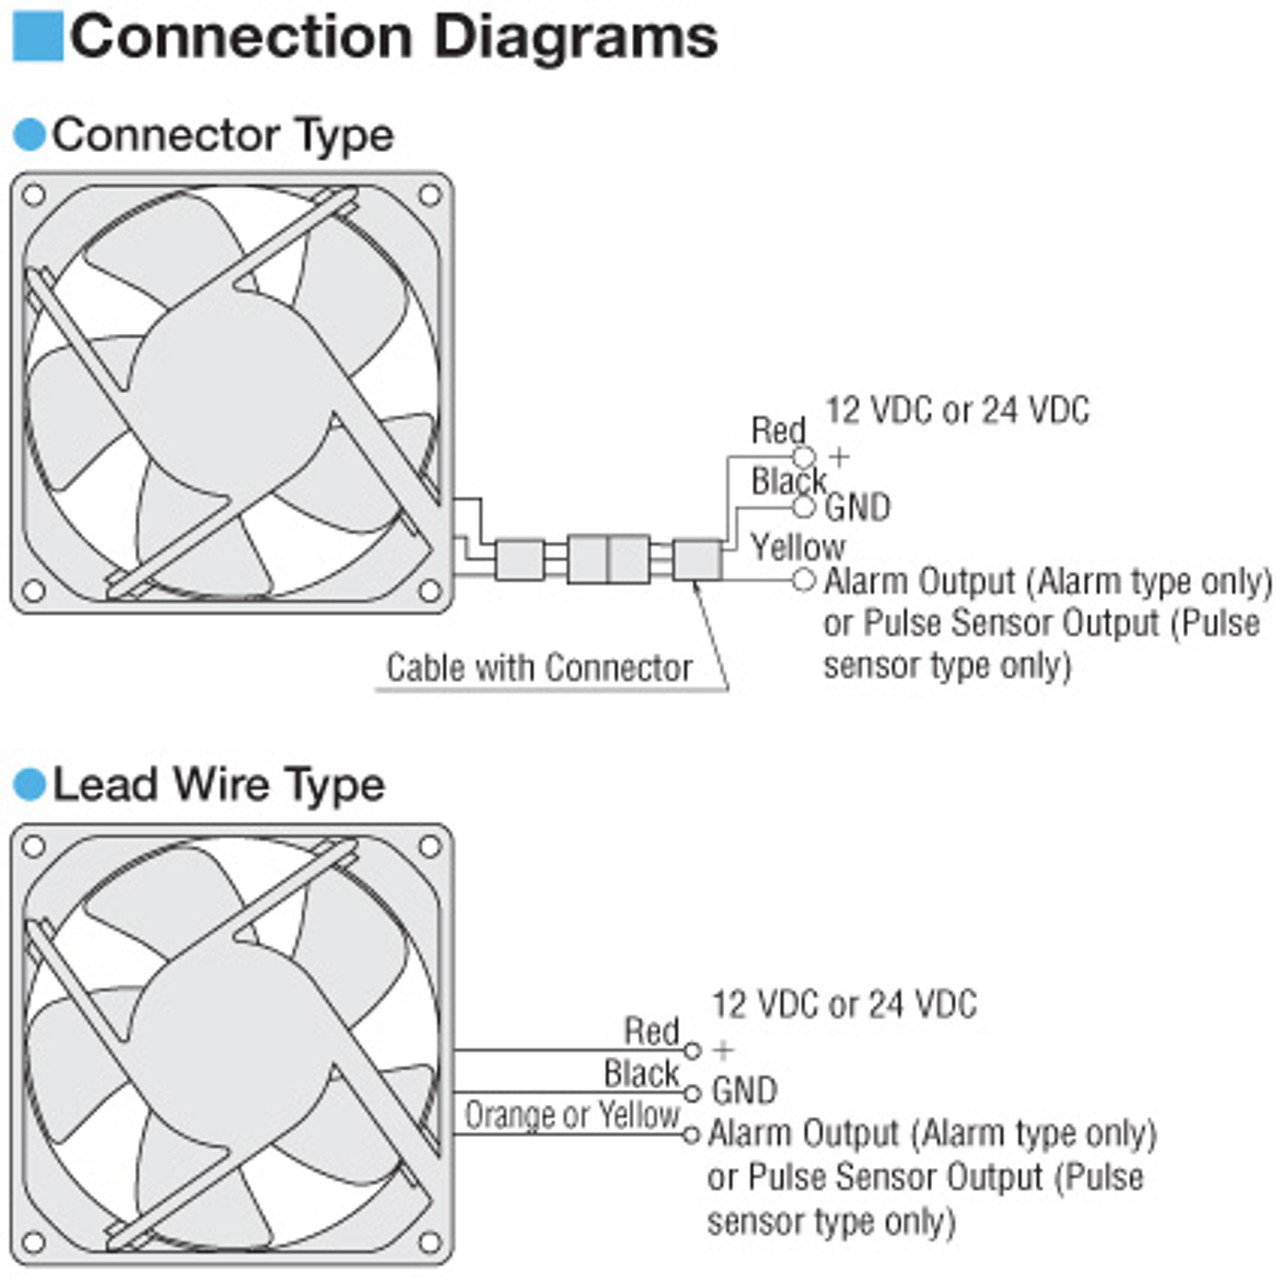 MD925A-12 - Connection